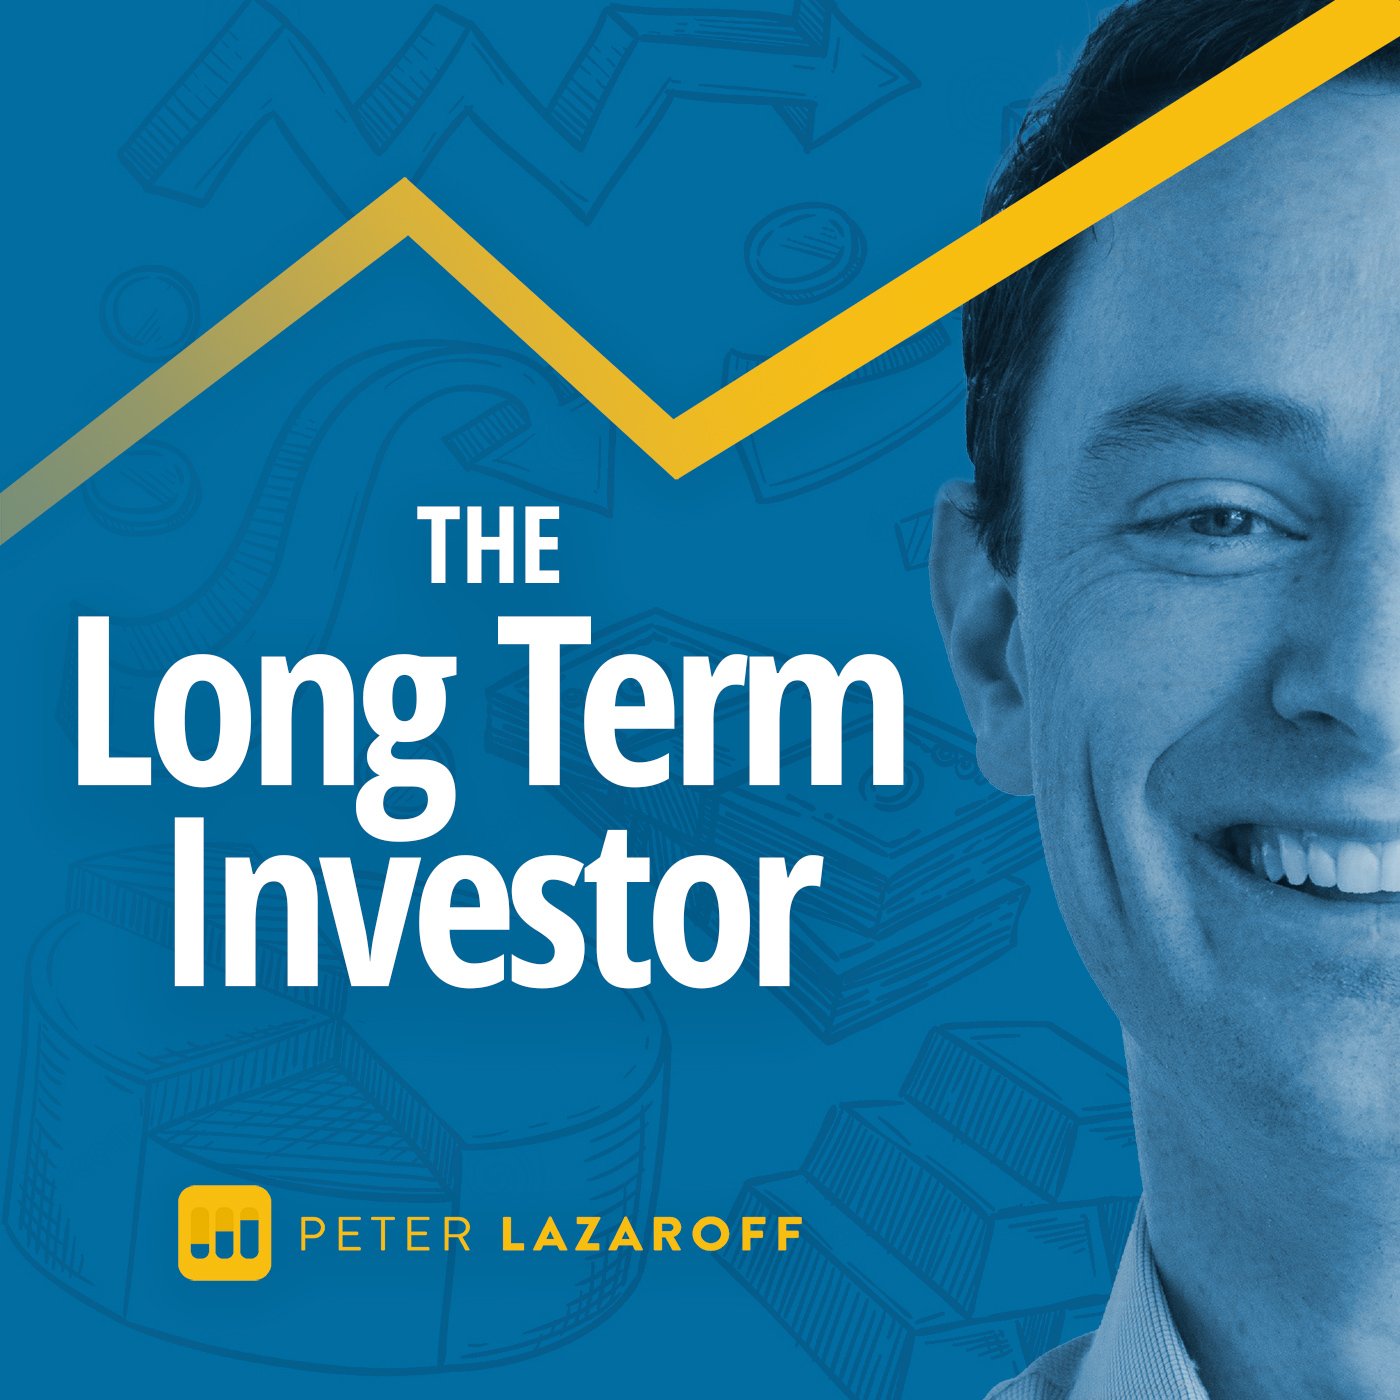 A New Podcast Designed to Help You Improve as a Long Term Investor